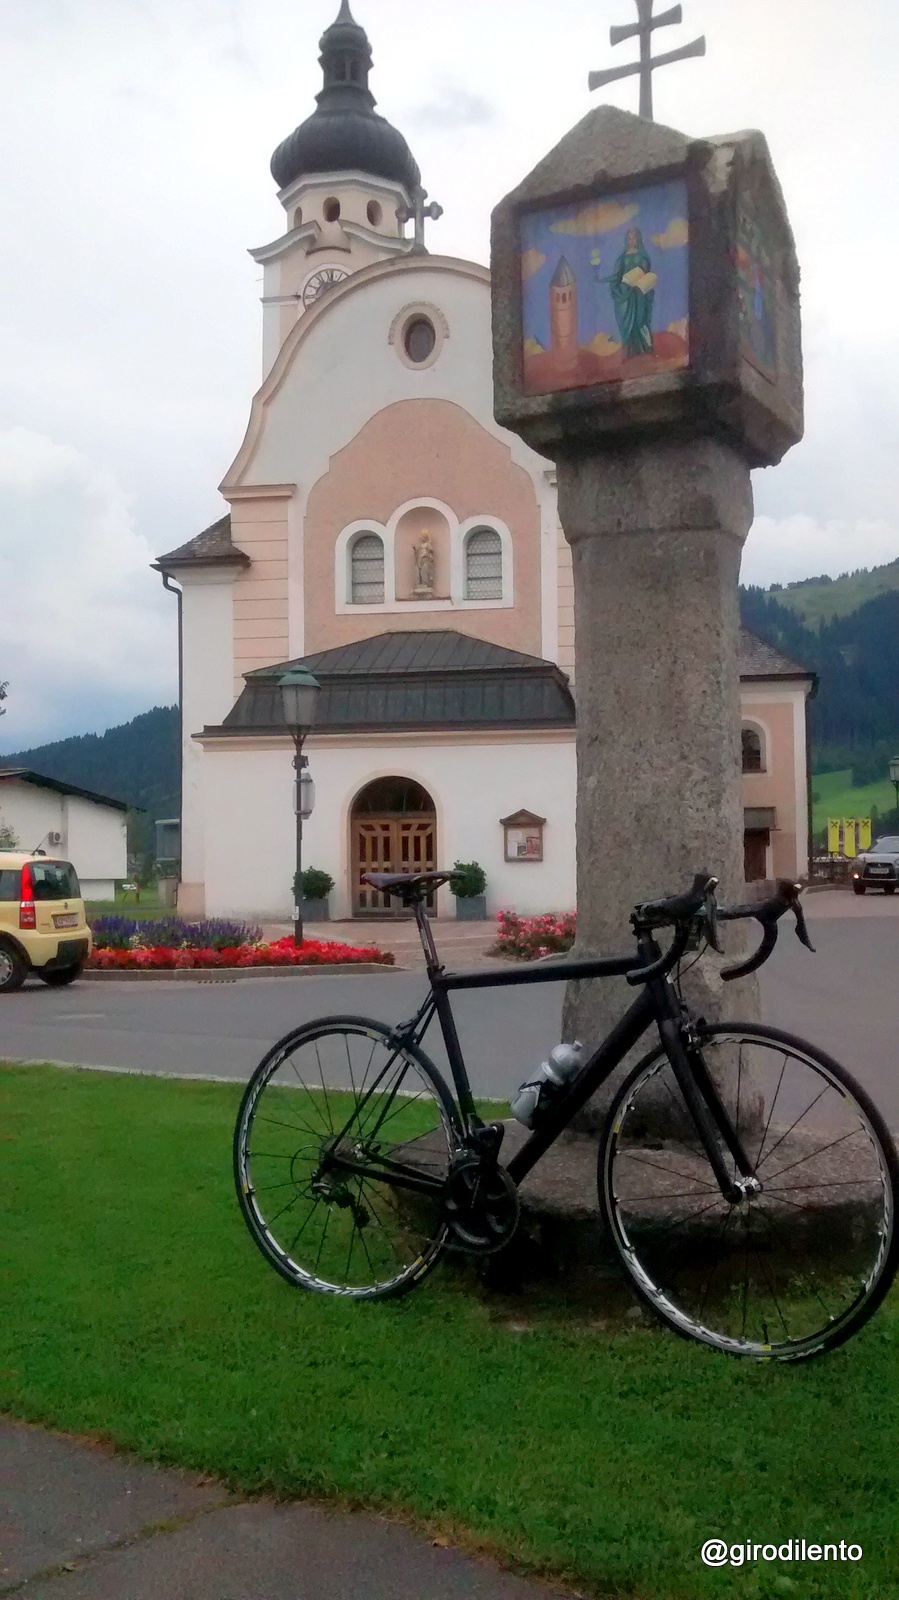 Enjoying the Austrian scenery and the new Xeon RS Ultegra